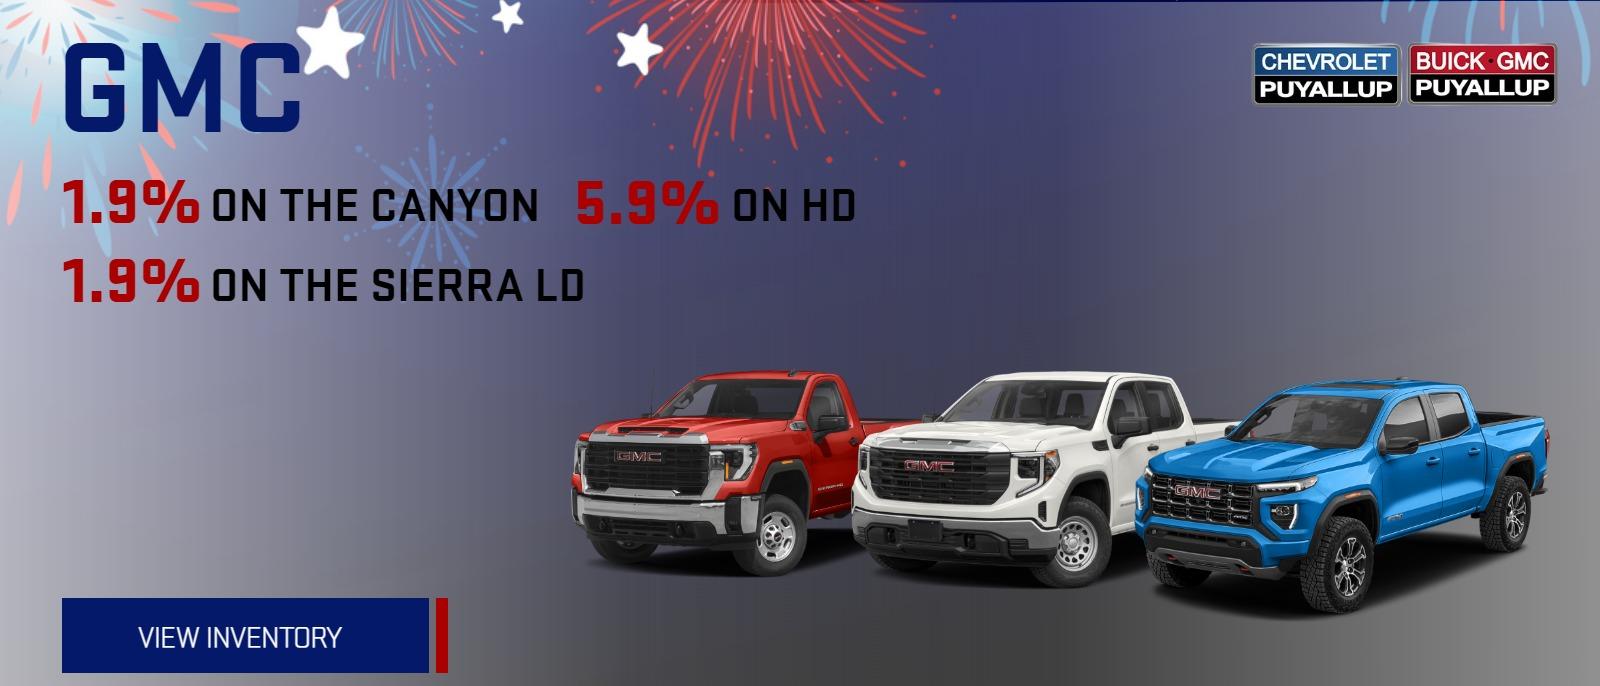 o GMC: 1.9% on the Canyon, 1.9 % on the Sierra LD, 5.9% on HD